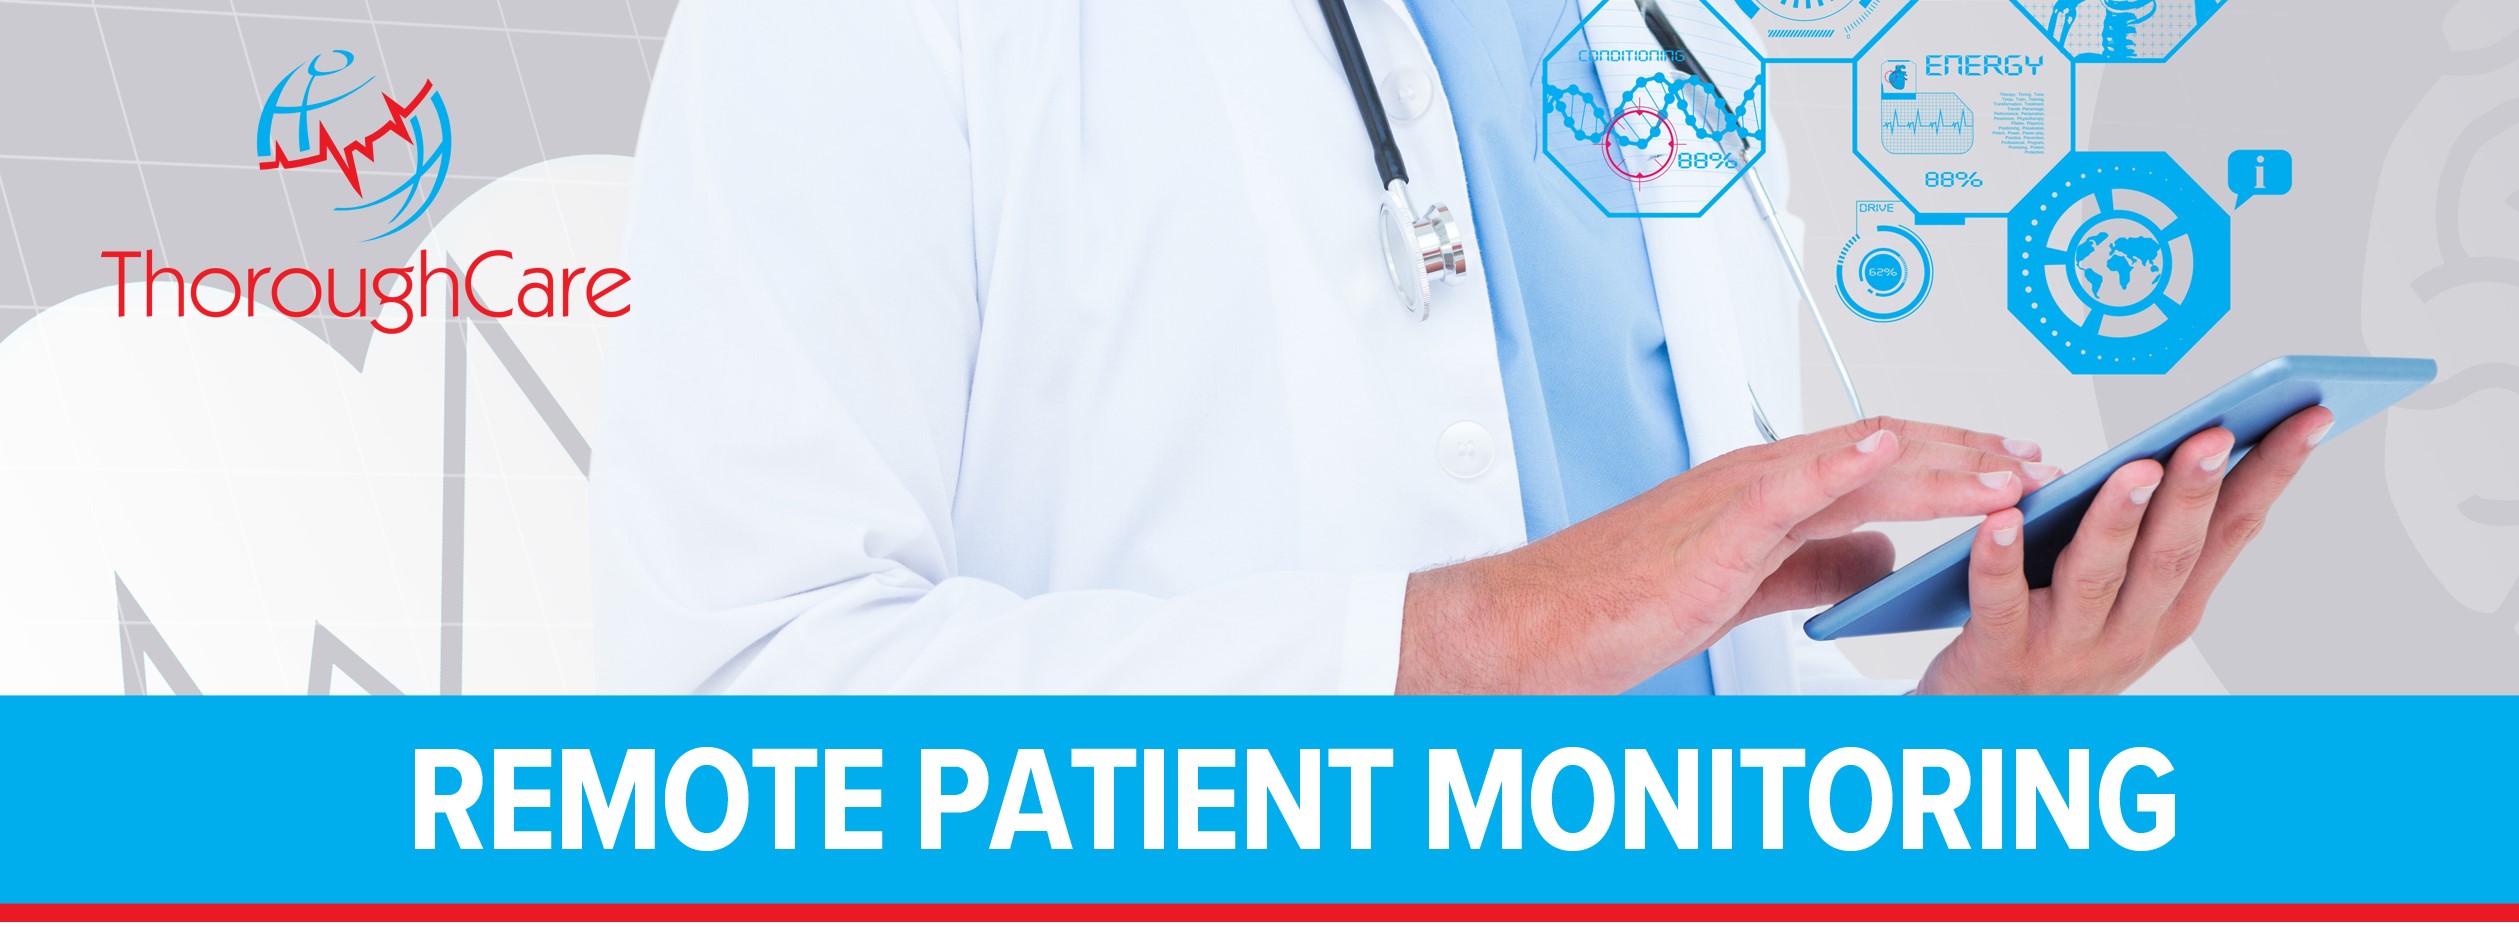 Remote Patient Monitoring: Elements, Benefits, and Starting Your Own